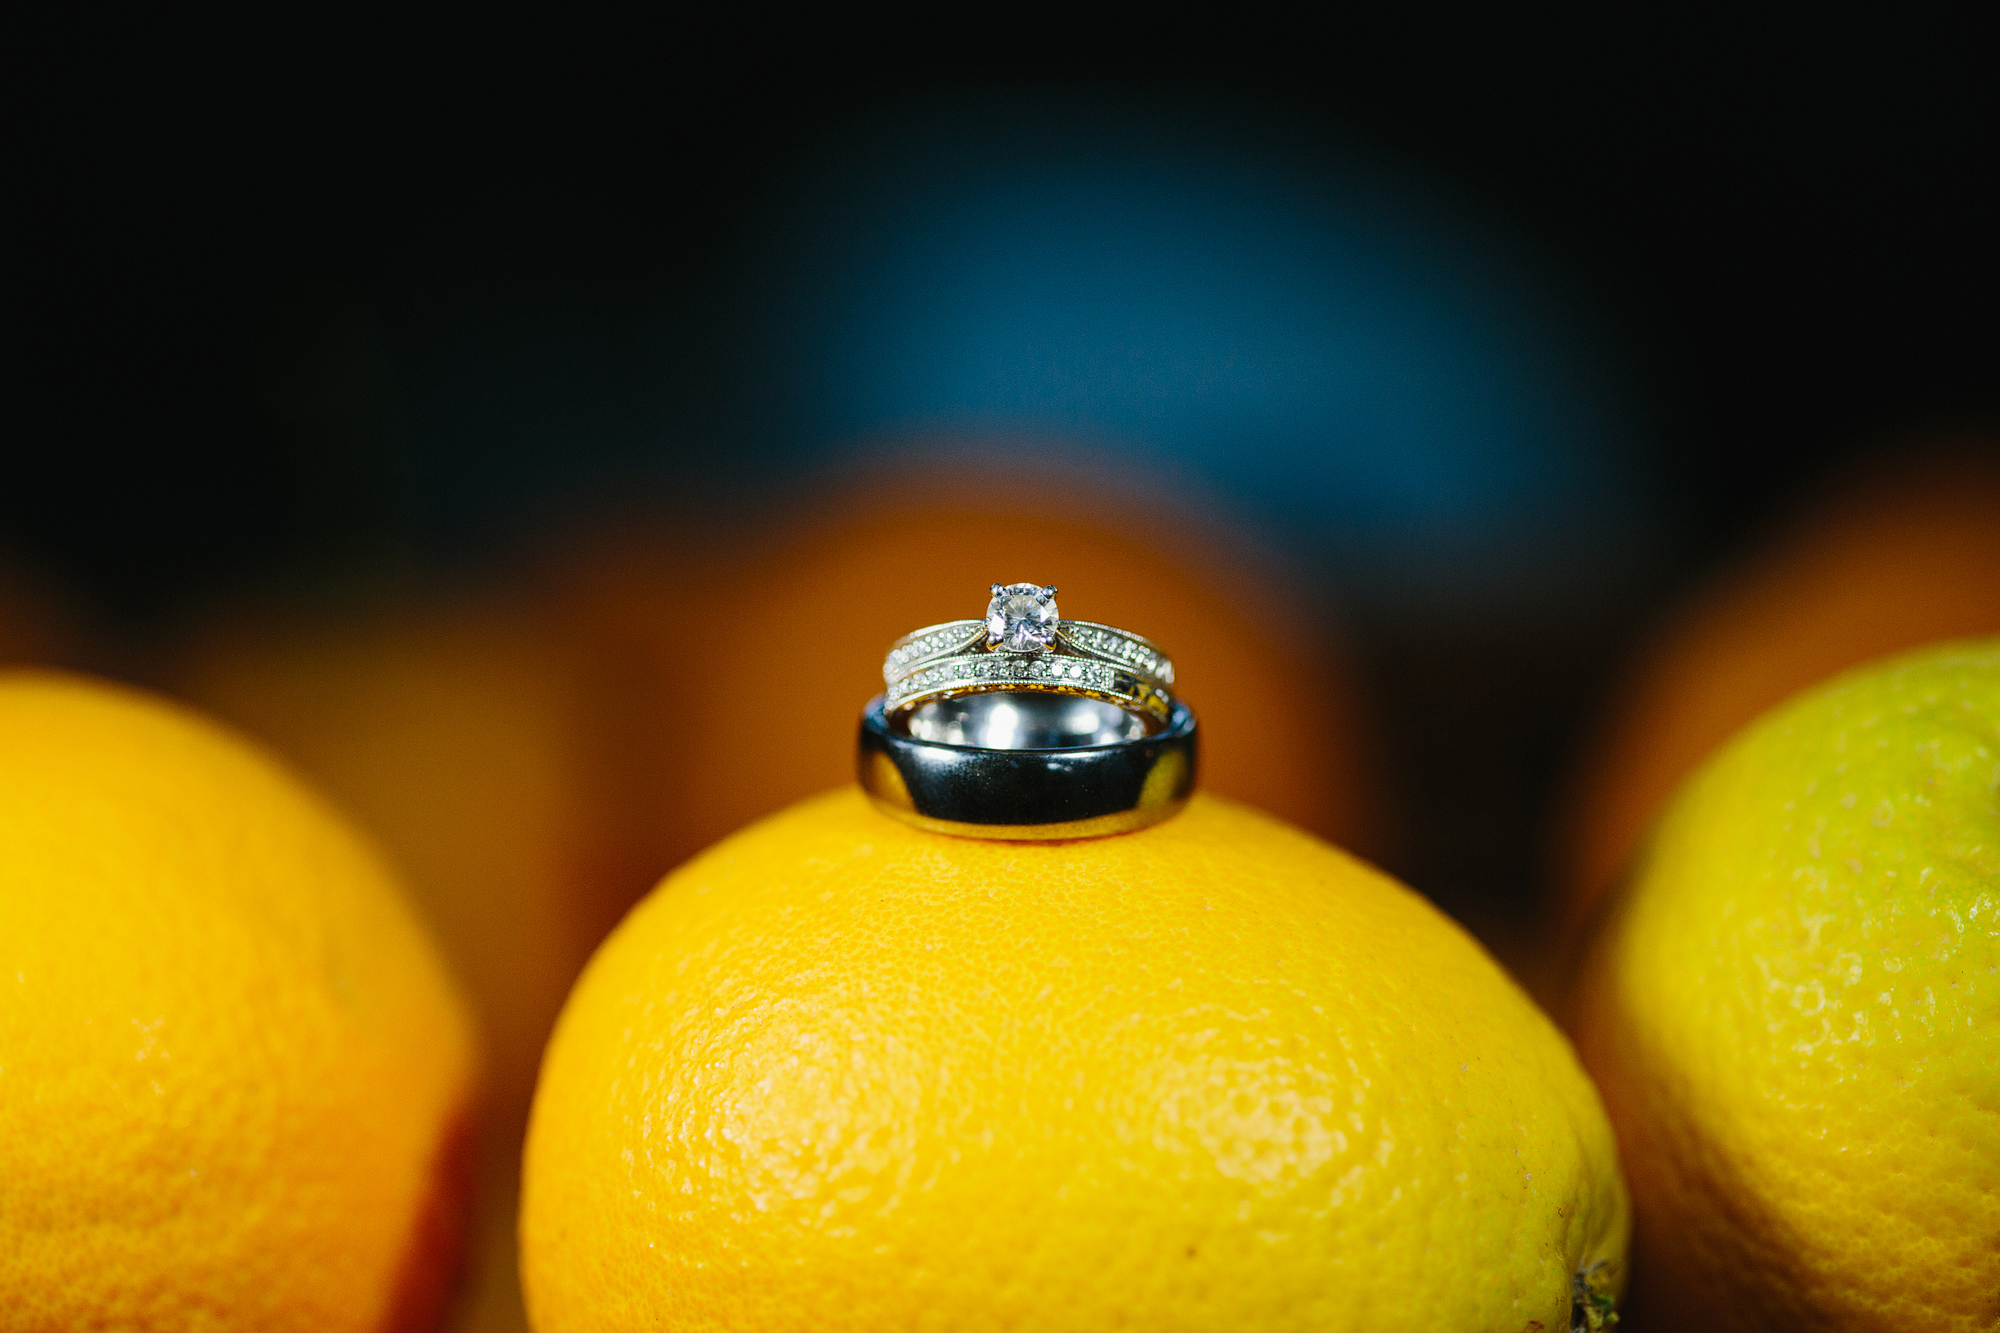 This is a ring shot on some citrus.